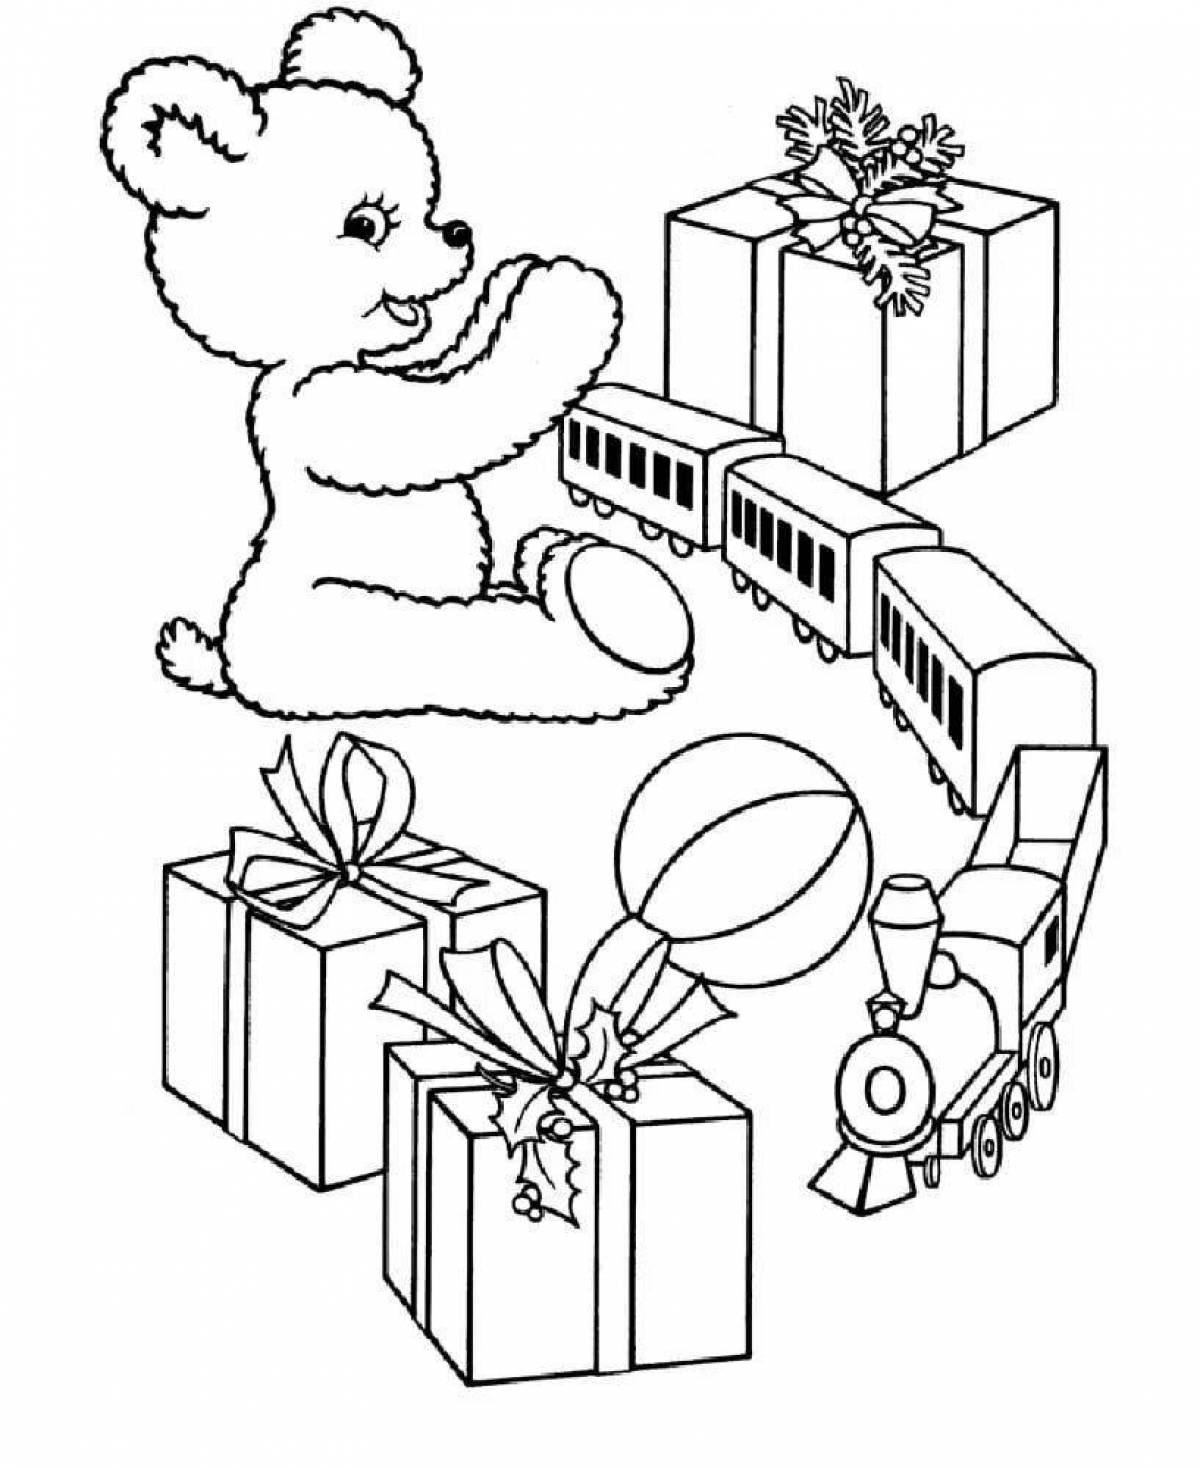 Amazing teddy bear with a gift coloring book